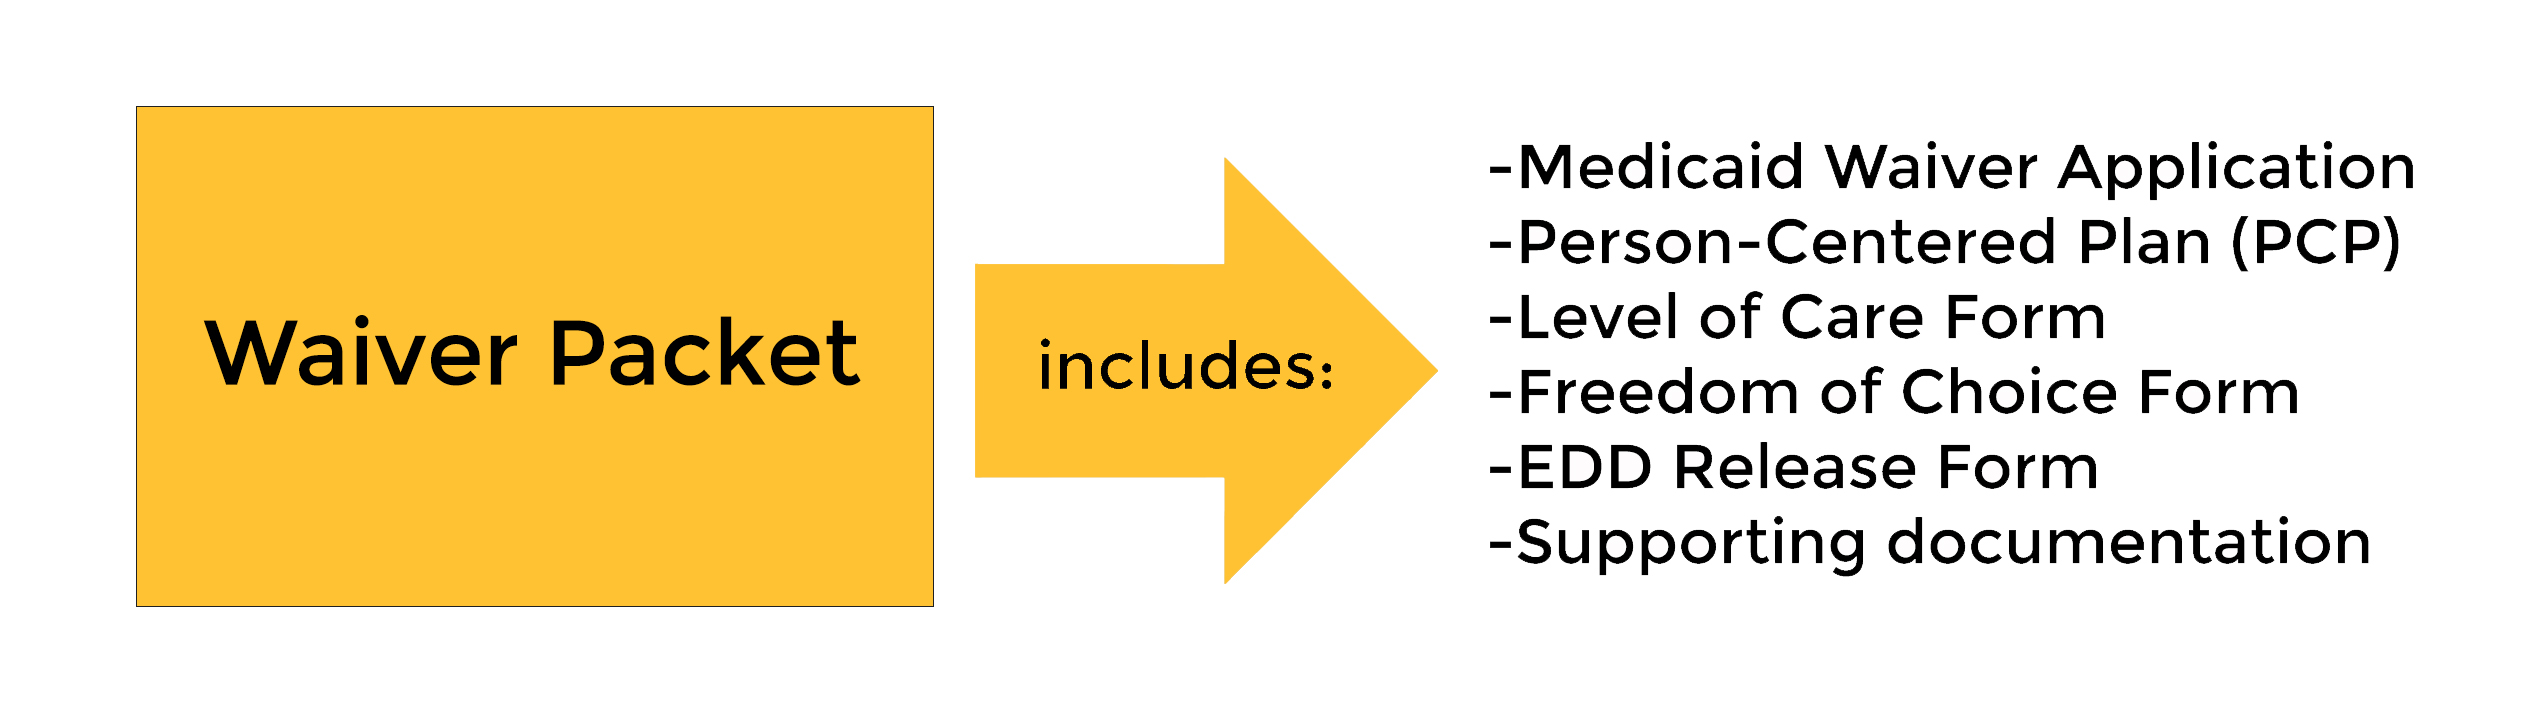 A diagram of the components of the waiver packet, including the Medicaid waiver application, the Person-Centered Plan (PCP), the Level of Care form, the Freedom of Choice form, the EDD Release Form, and supporting documentation.